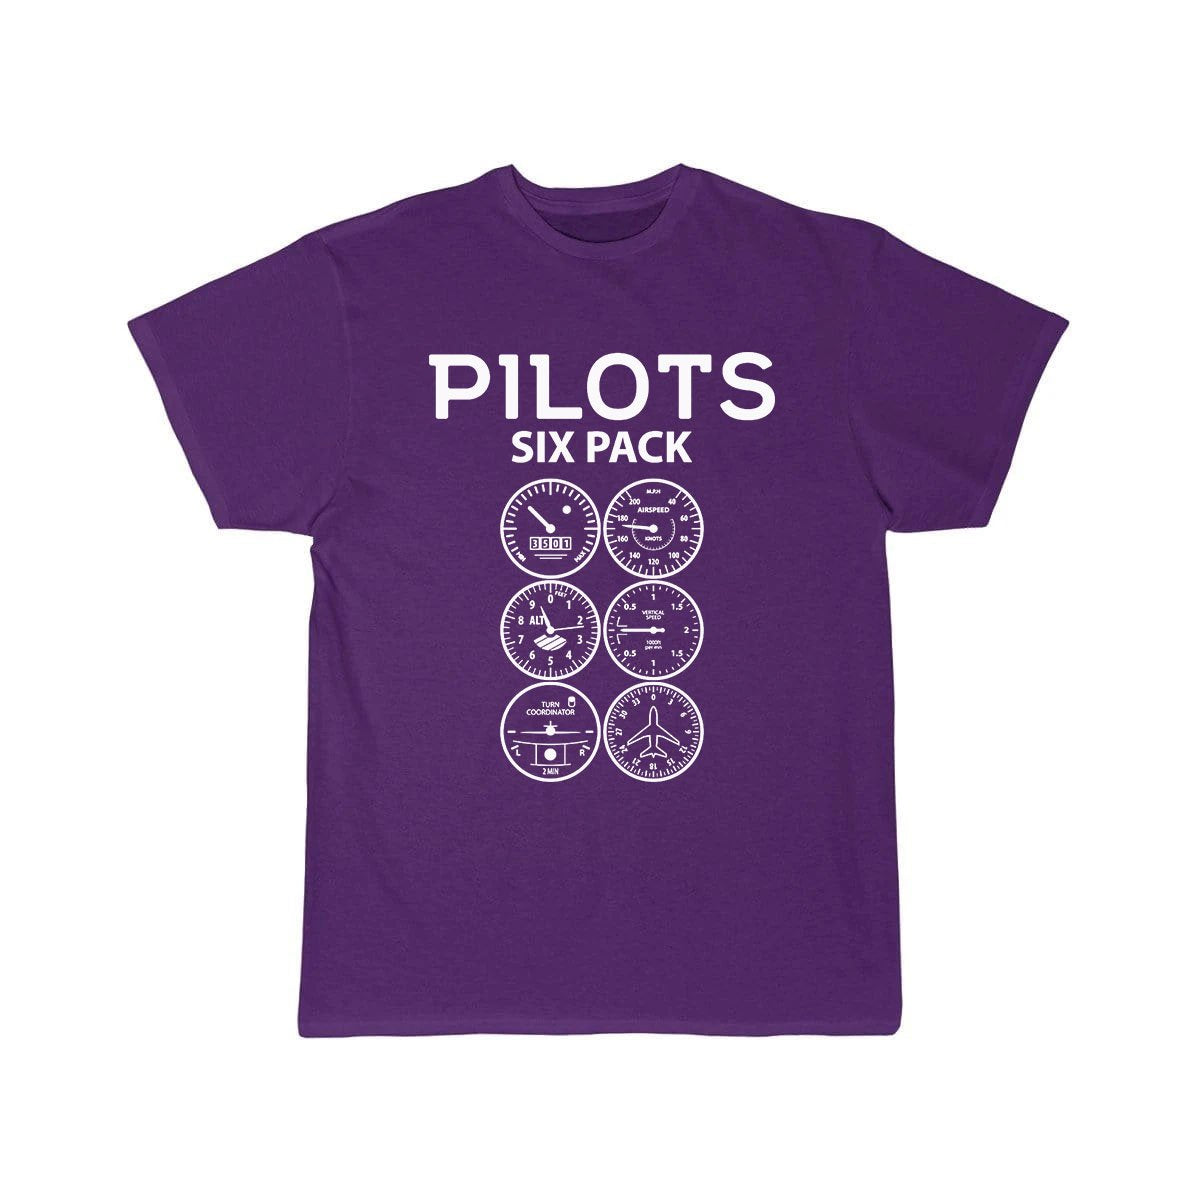 PILOTS SIXPACK - FUNNY AVIATION QUOTES GIFT CLASSIC T-SHIRT THE AV8R